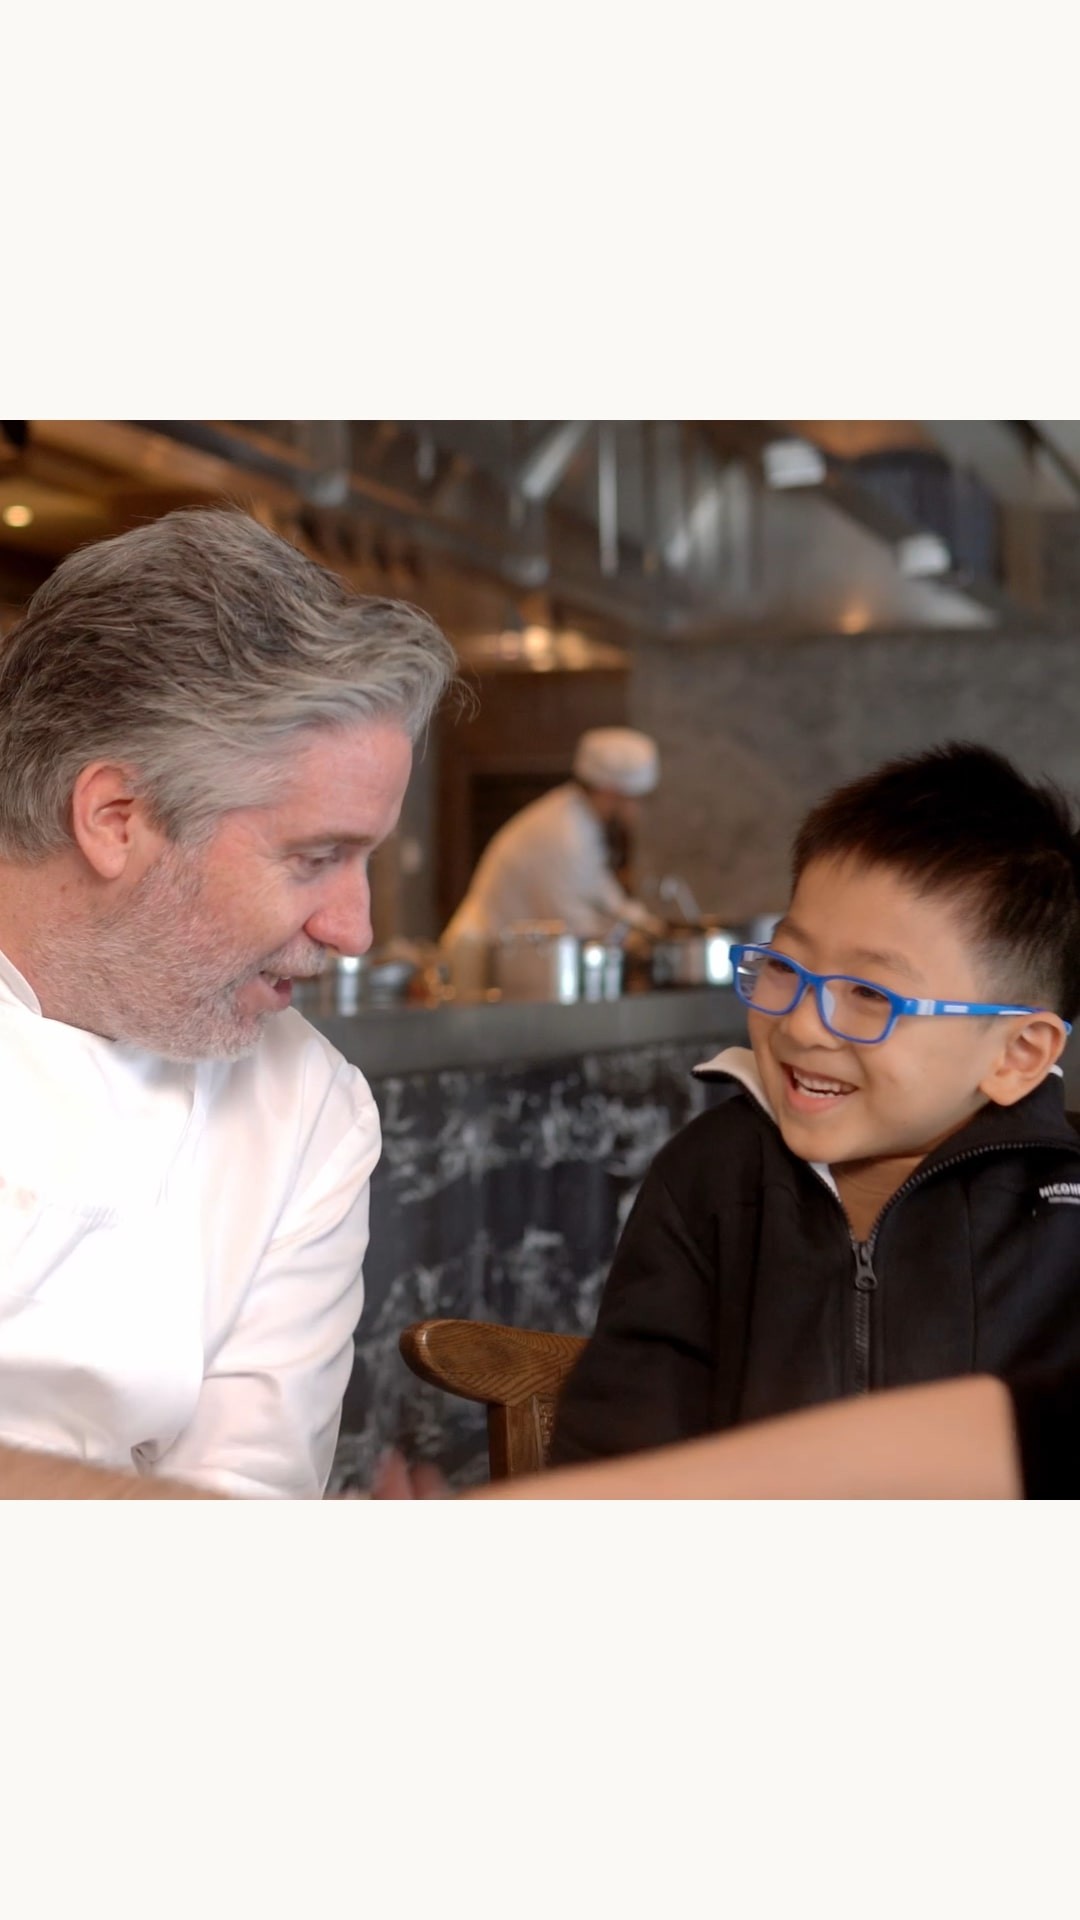 Have you heard about our #GreenKitchen ? 

To celebrate #WorldEnvironmentDay, our chefs speak with the next generation about the importance of sustainability in our kitchens.

If you haven’t yet, check out our full video in the link in bio.

#SD2030 #ThinkDifferently #SmallActionsBigChanges #EASTGoGreen #OurGreenHouses